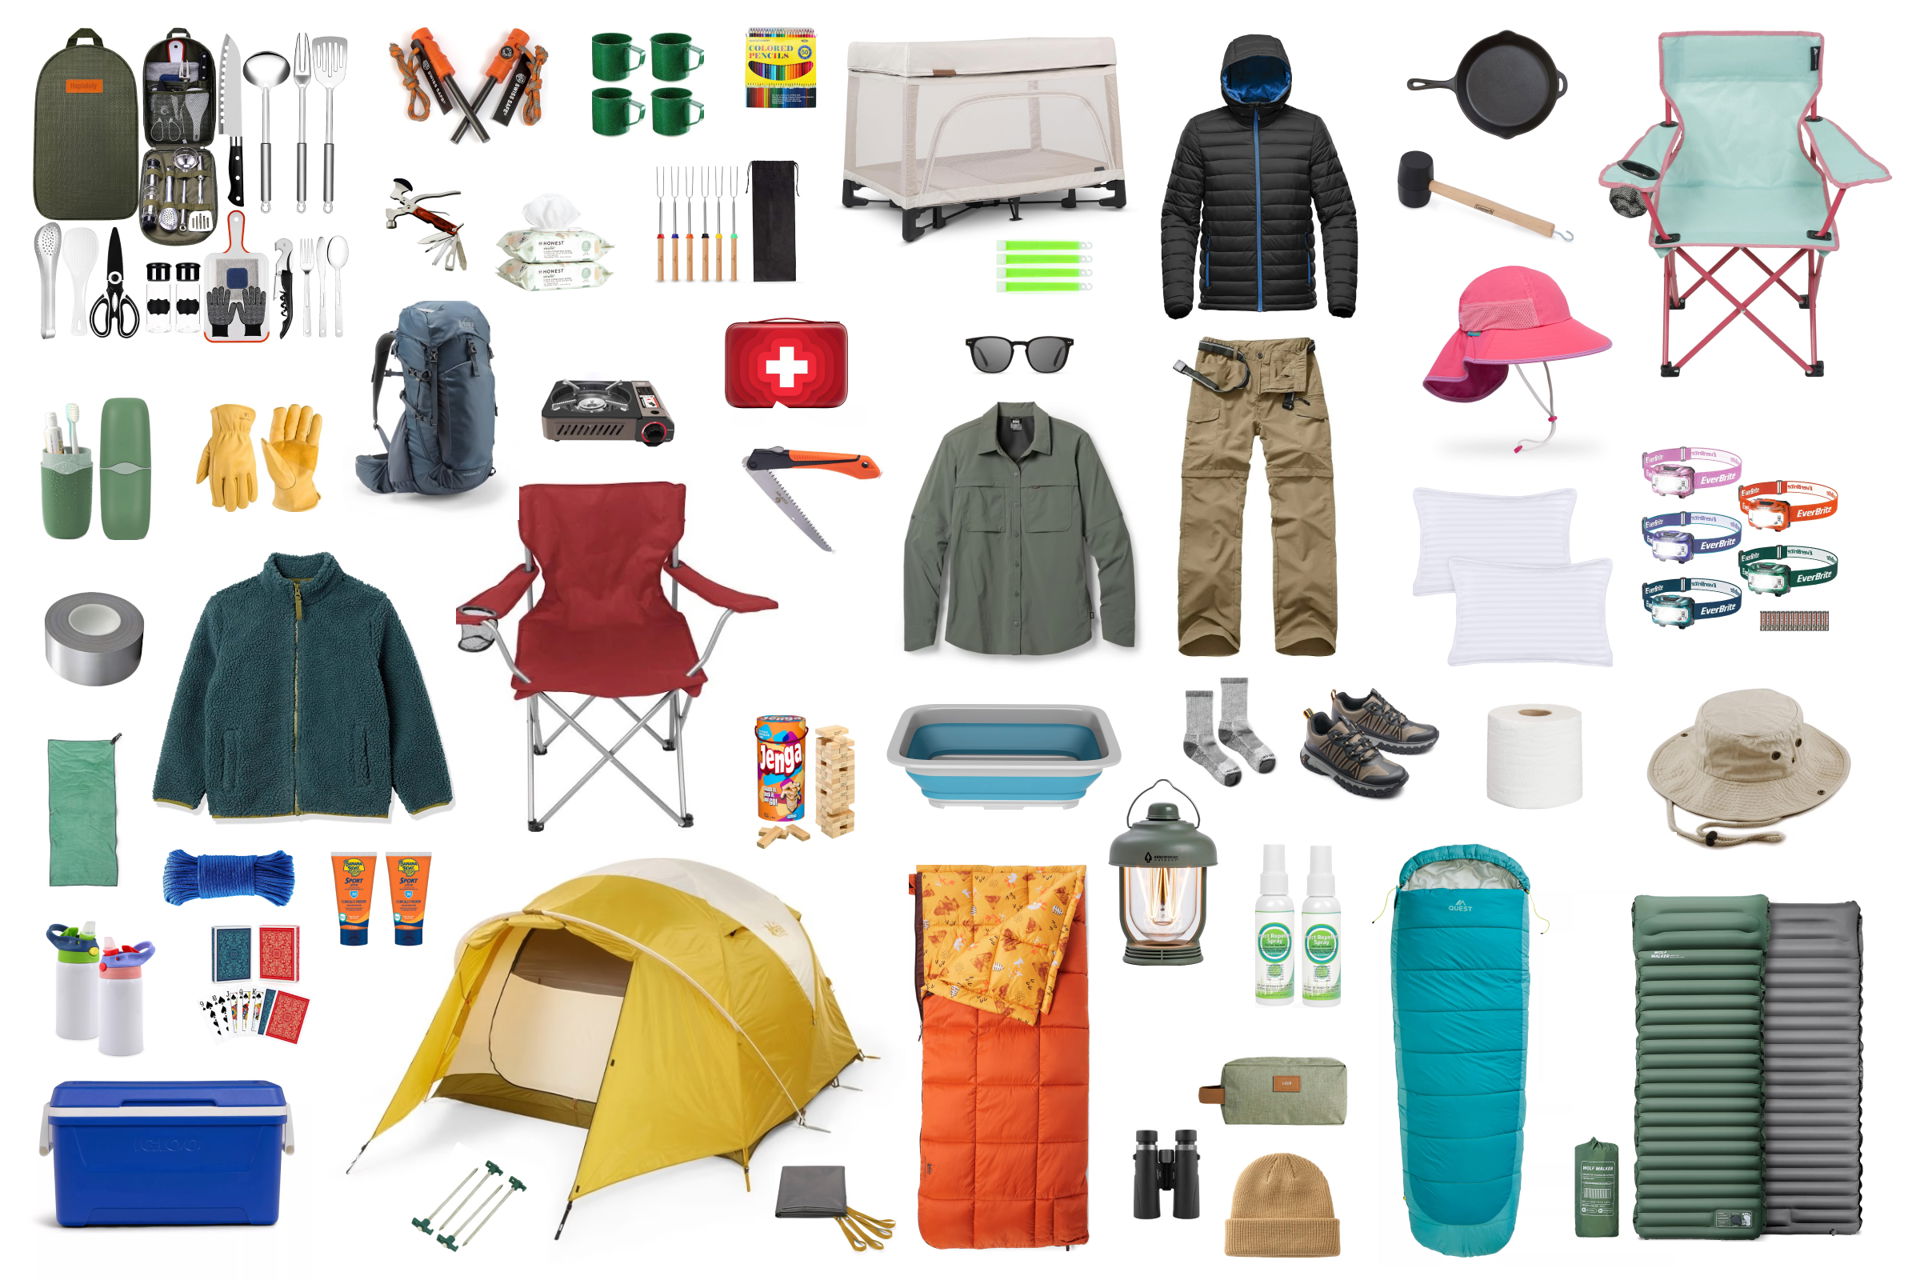 Family Camping Checklist: Packing Made Easy